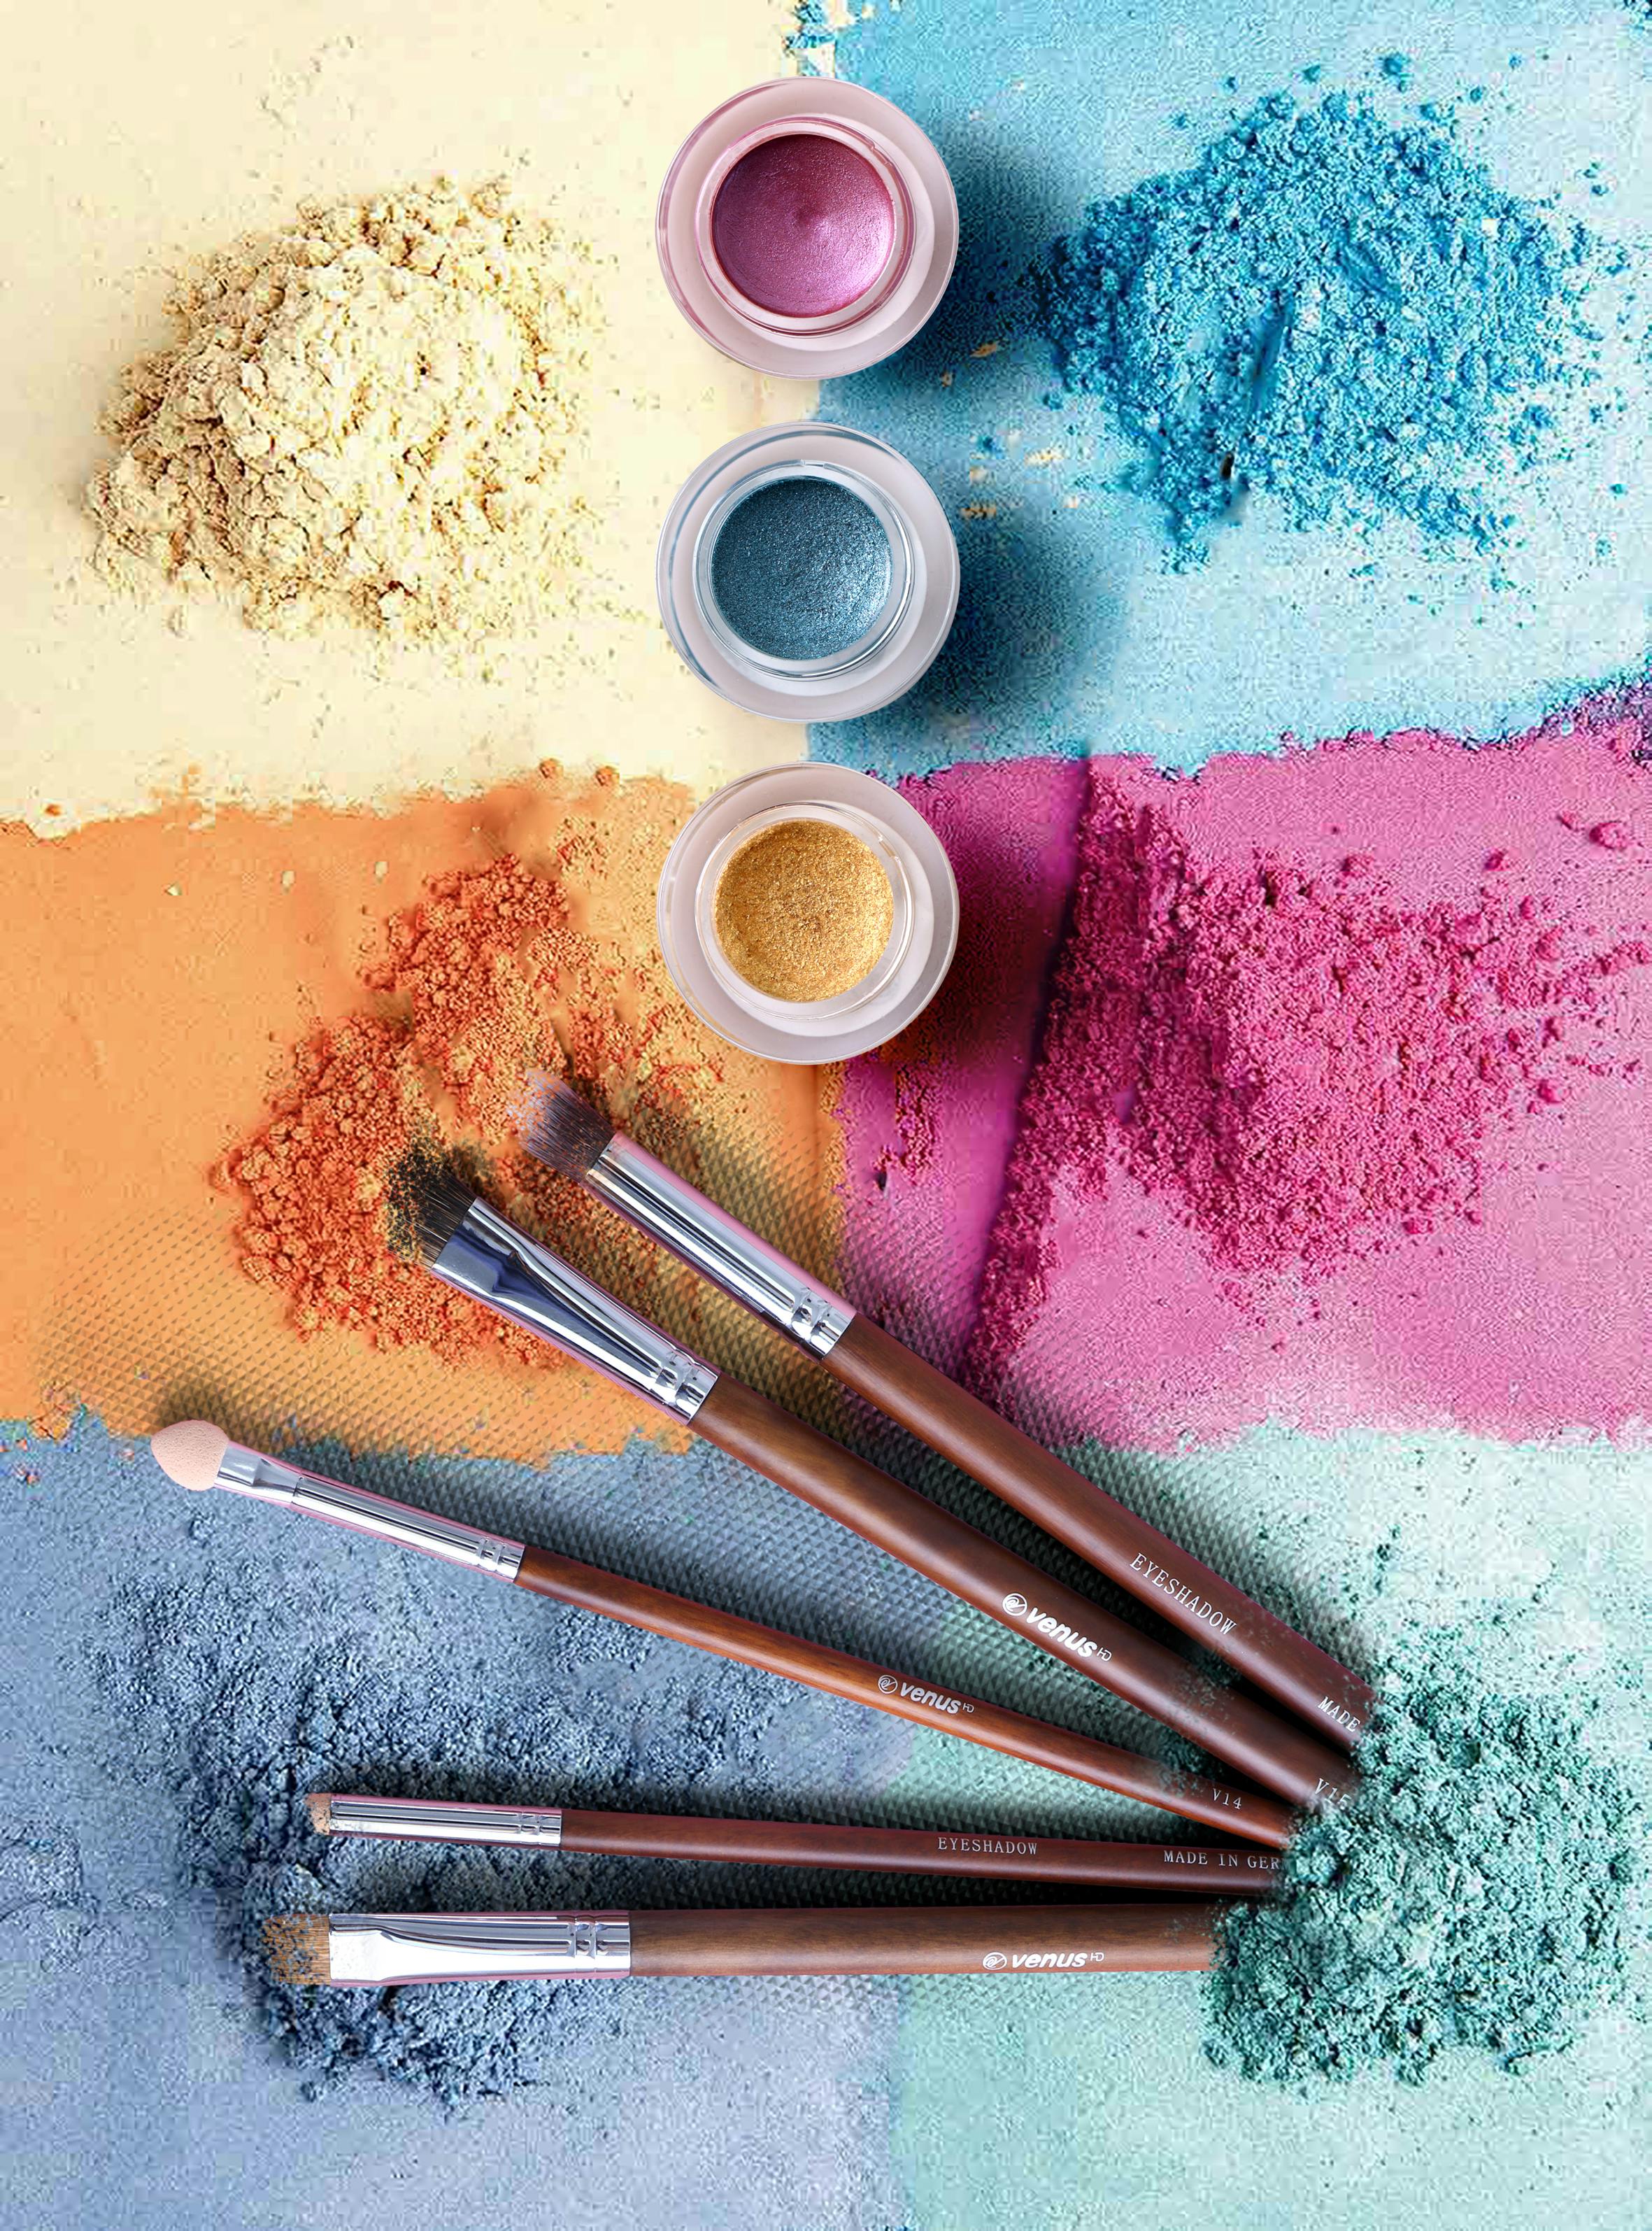 What Is The Least Price I Can Get A Mica Powder Pigment For In Canada?